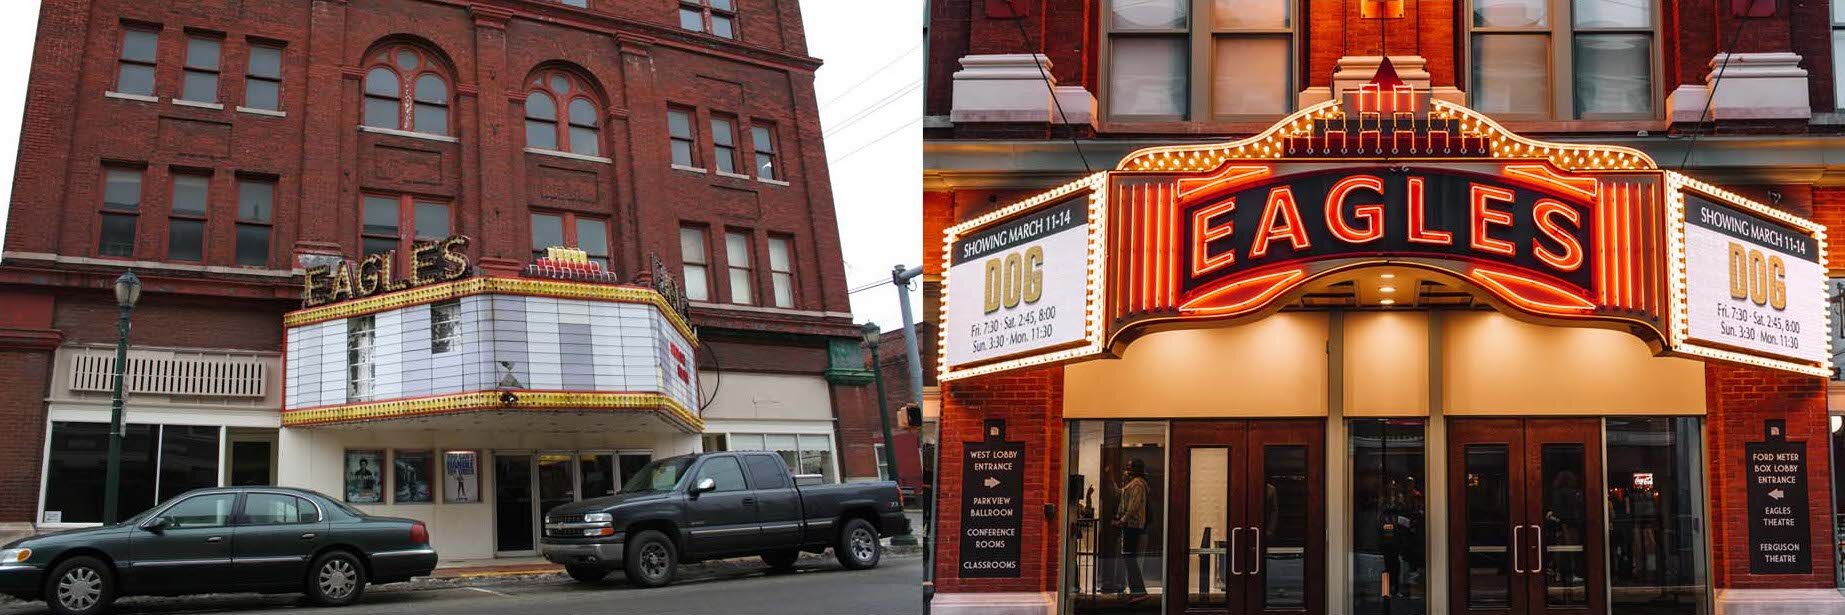 The marquee at the Eagles Theatre before and after renovations.